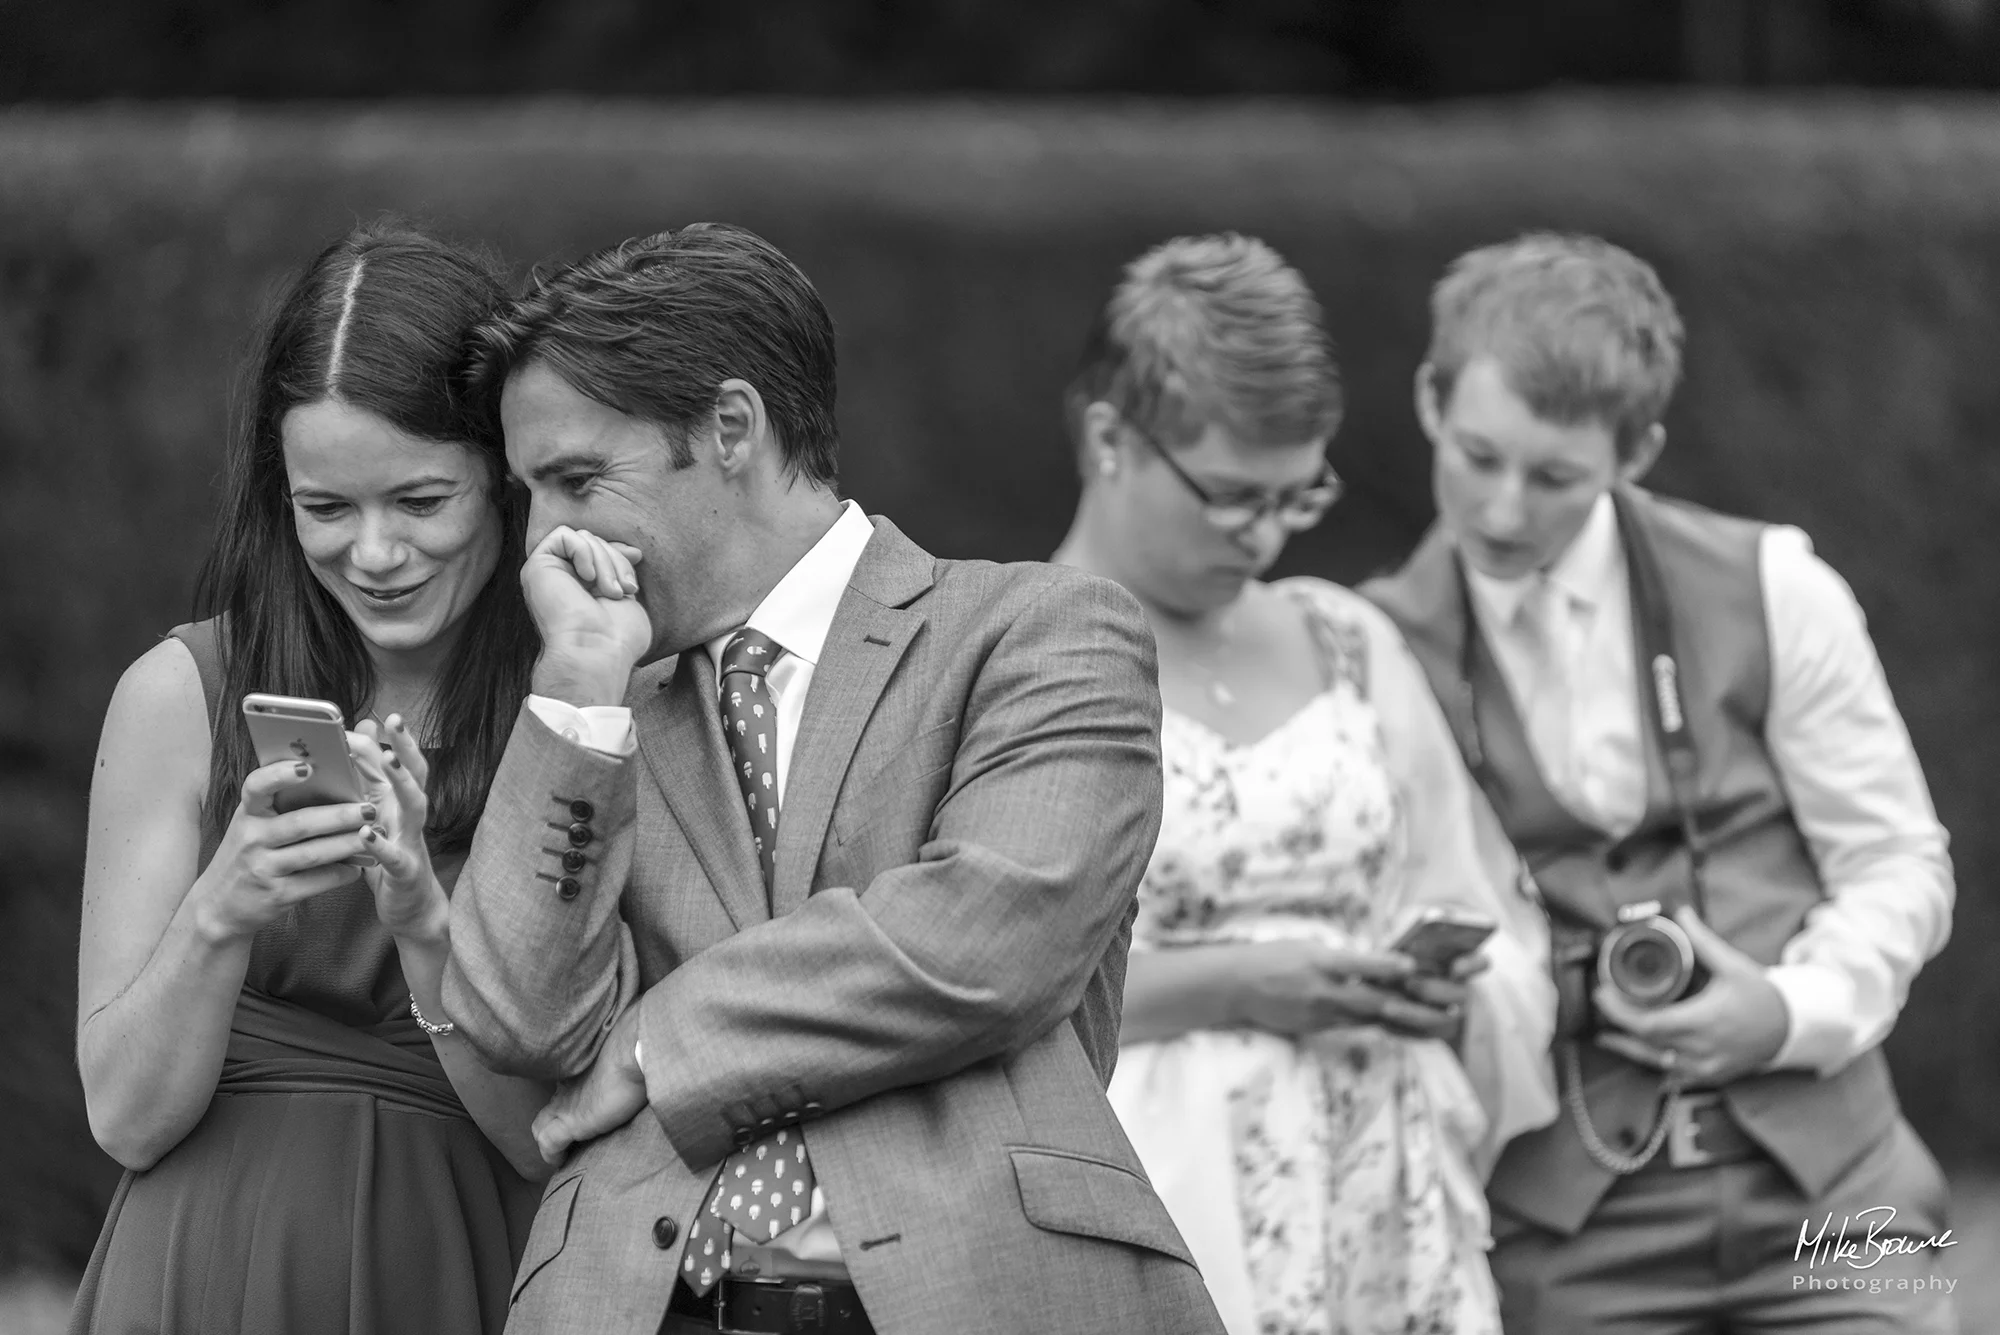 Two couples looking at their phoned at a wedding